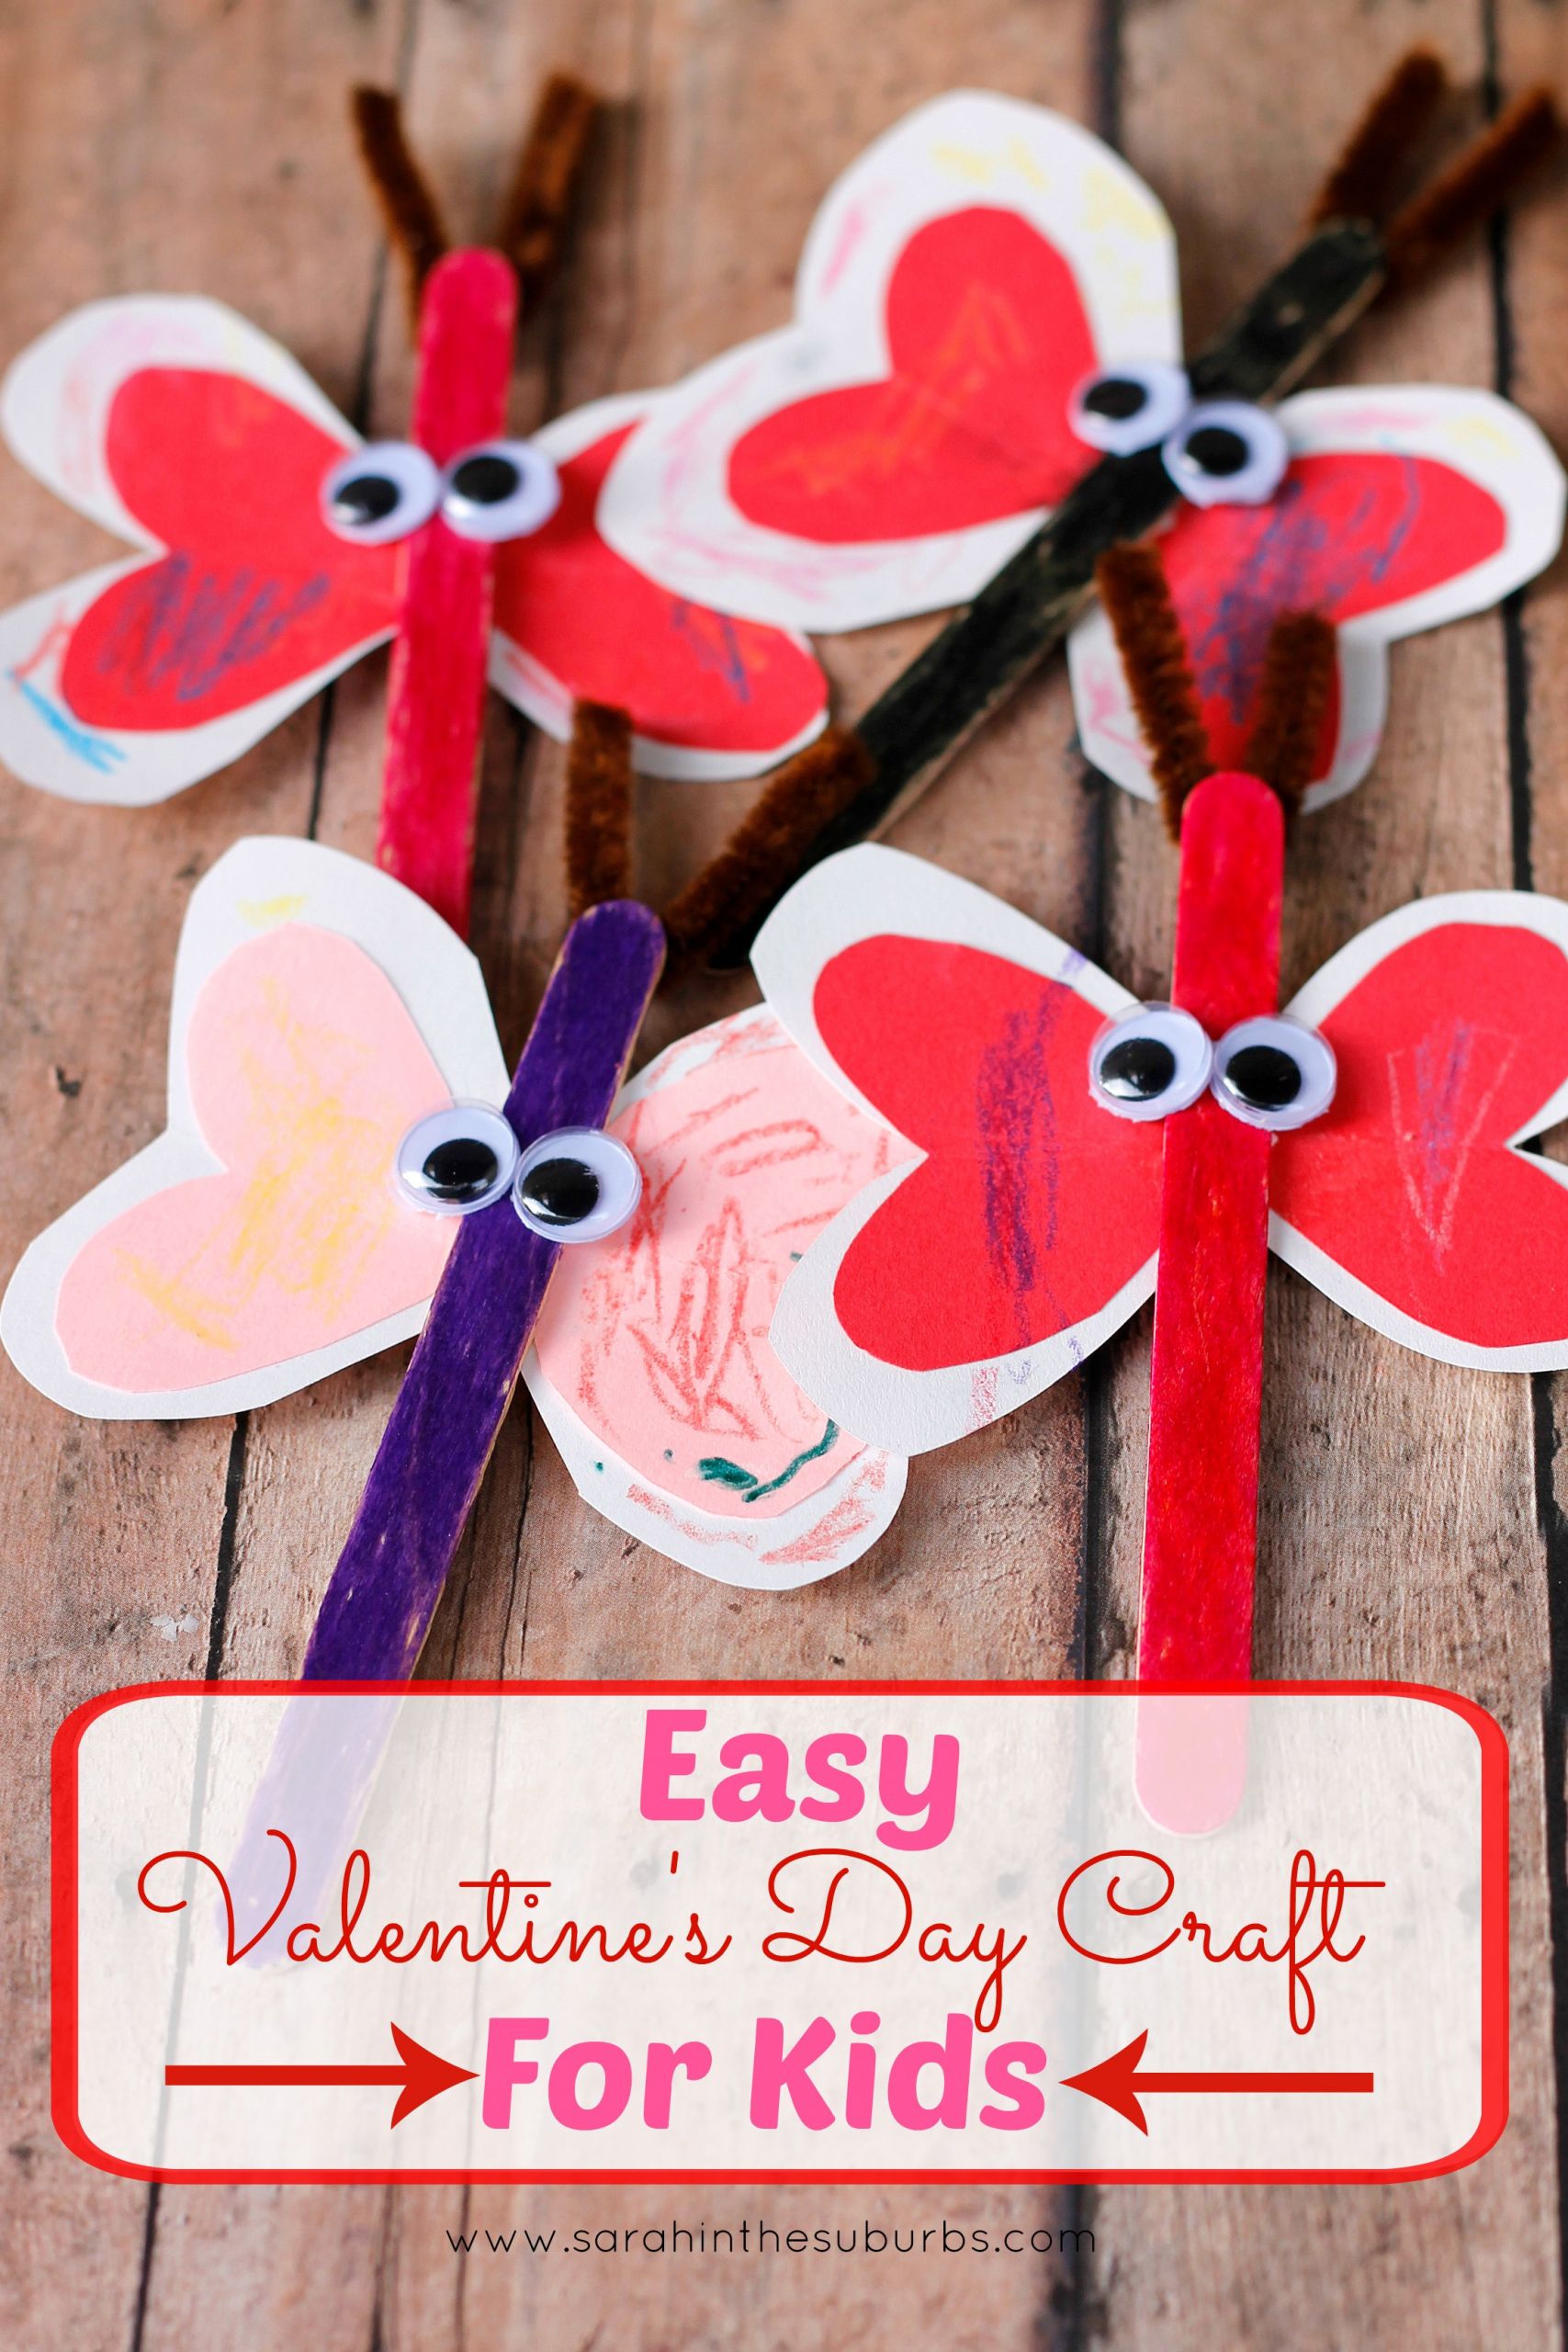 Easy Valentine Crafts For Preschoolers
 Love Bug Valentine s Day Craft for Kids Sarah in the Suburbs